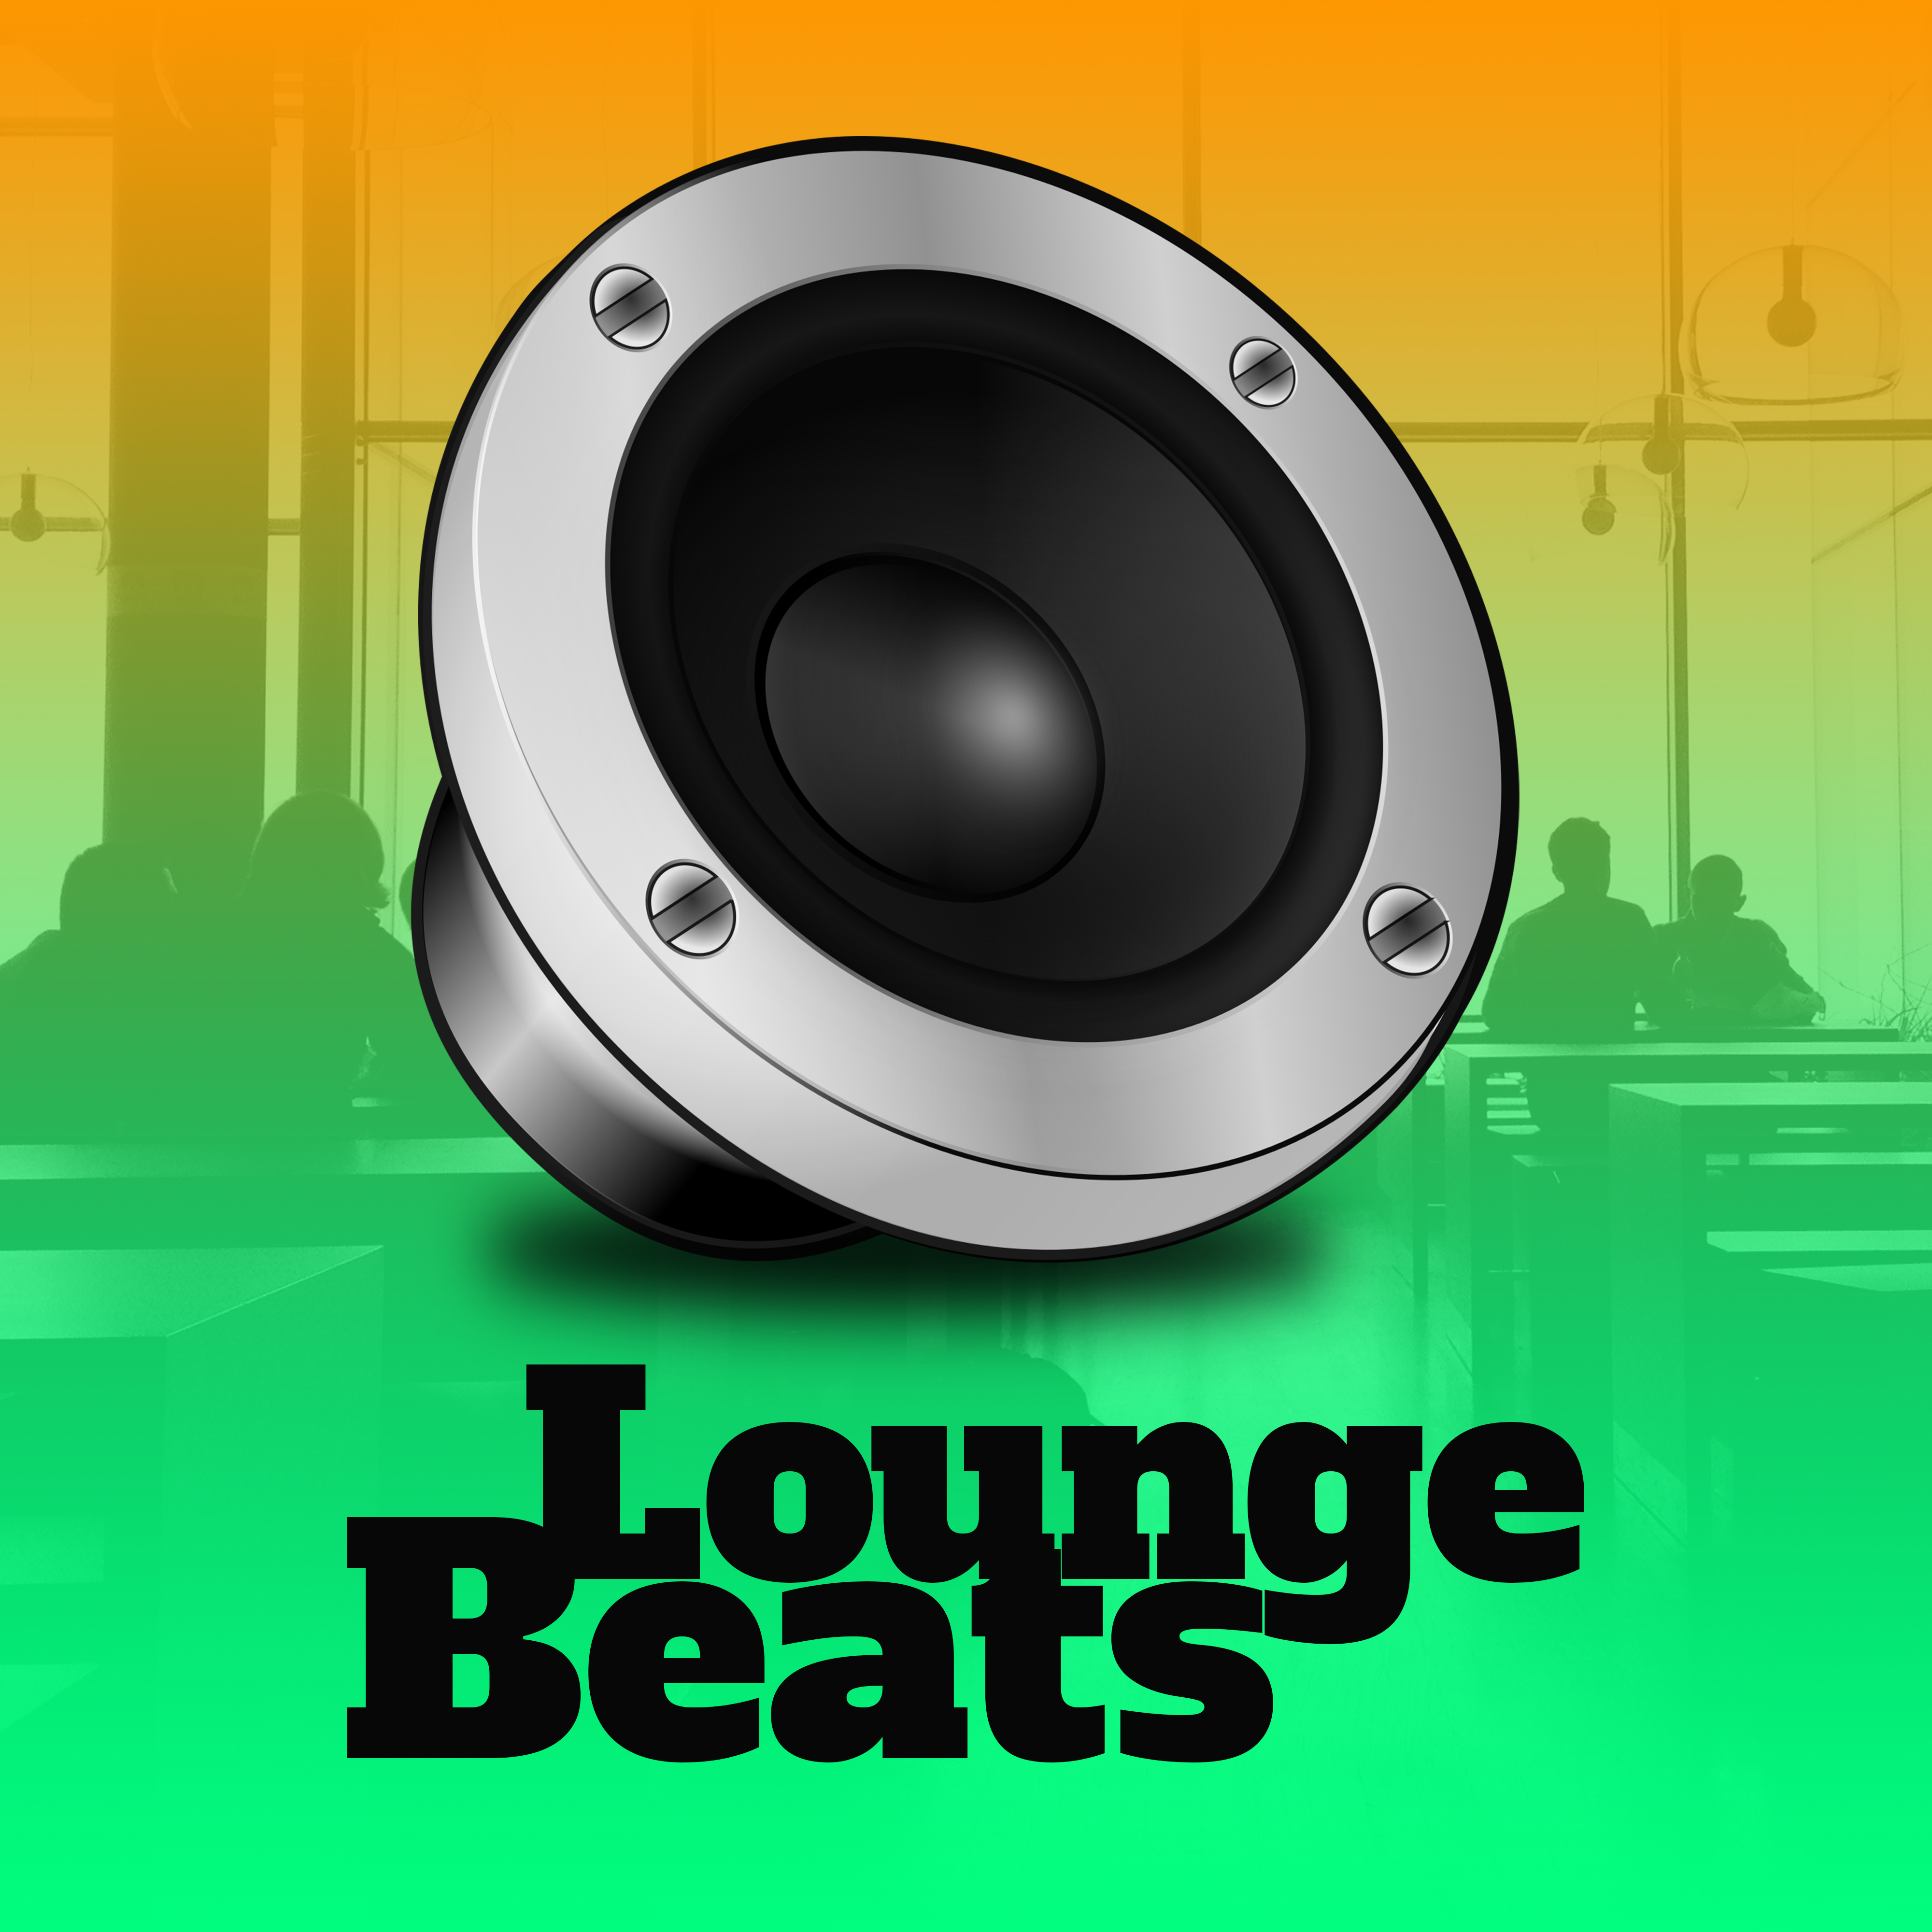 Lounge Beats – Chill Out 2017, Deep Beats, Dance Music, Party Hits 2017, Electro Vibes